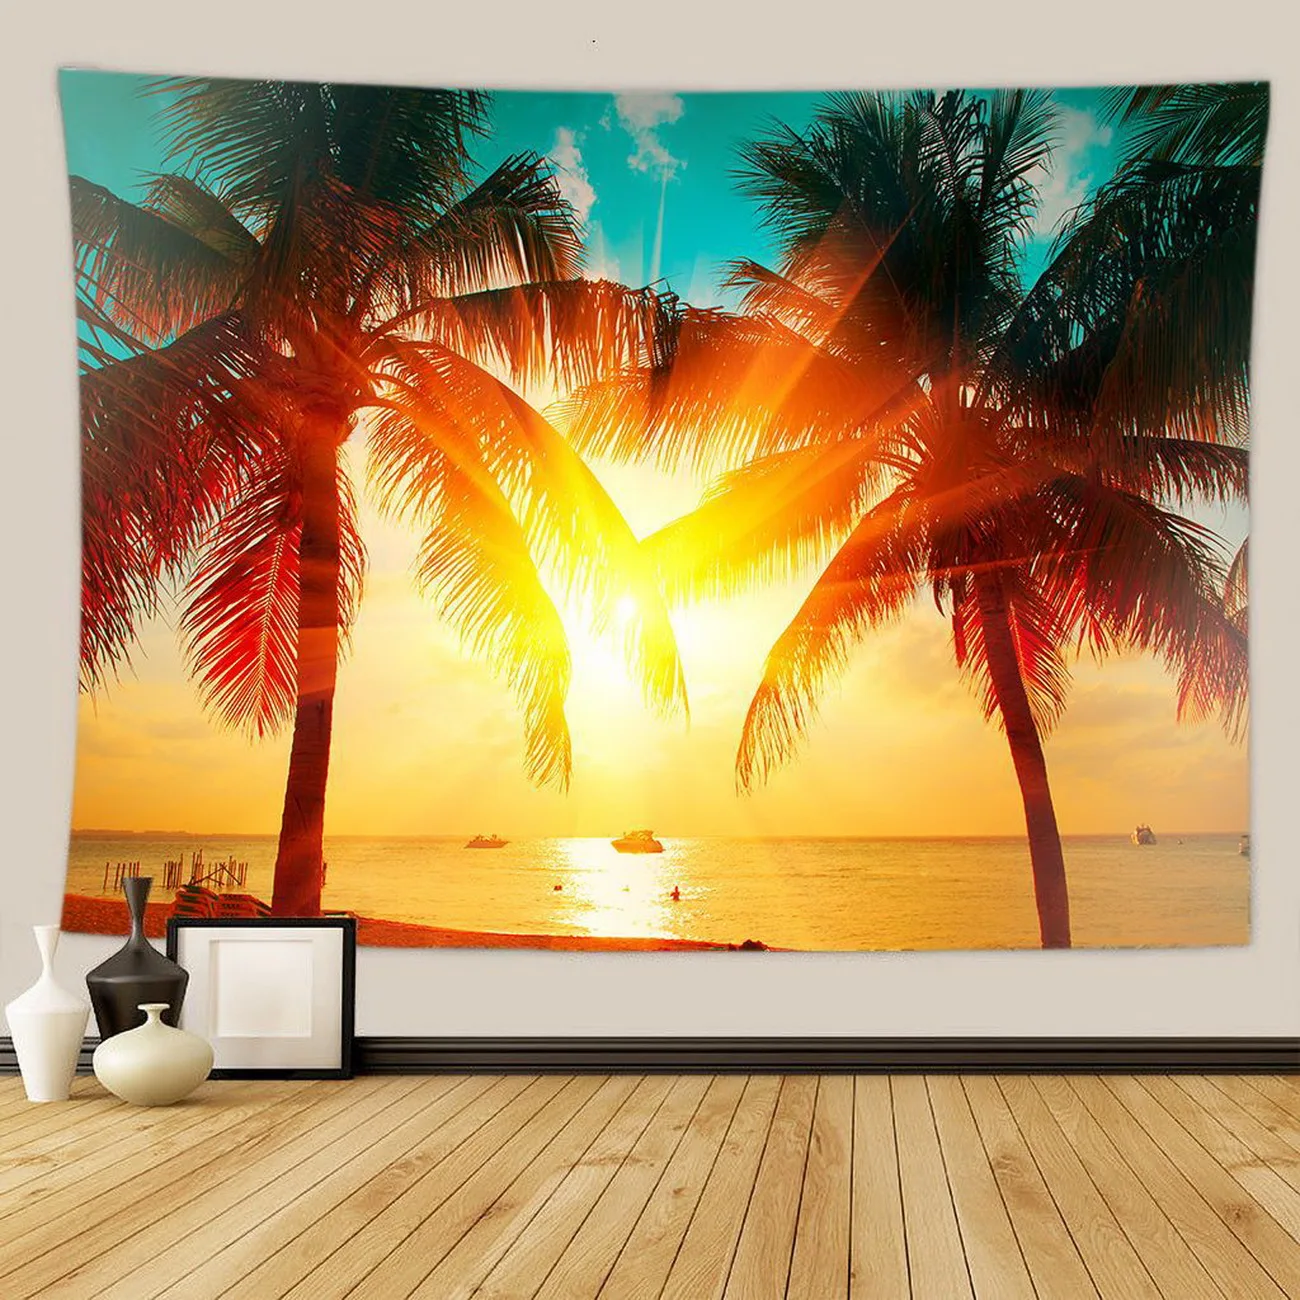 

Beautiful Seascape Coconut Tree Sunset Tapestry Room Decor Aesthetic Living Room Decoration Tapestry Wall Hanging